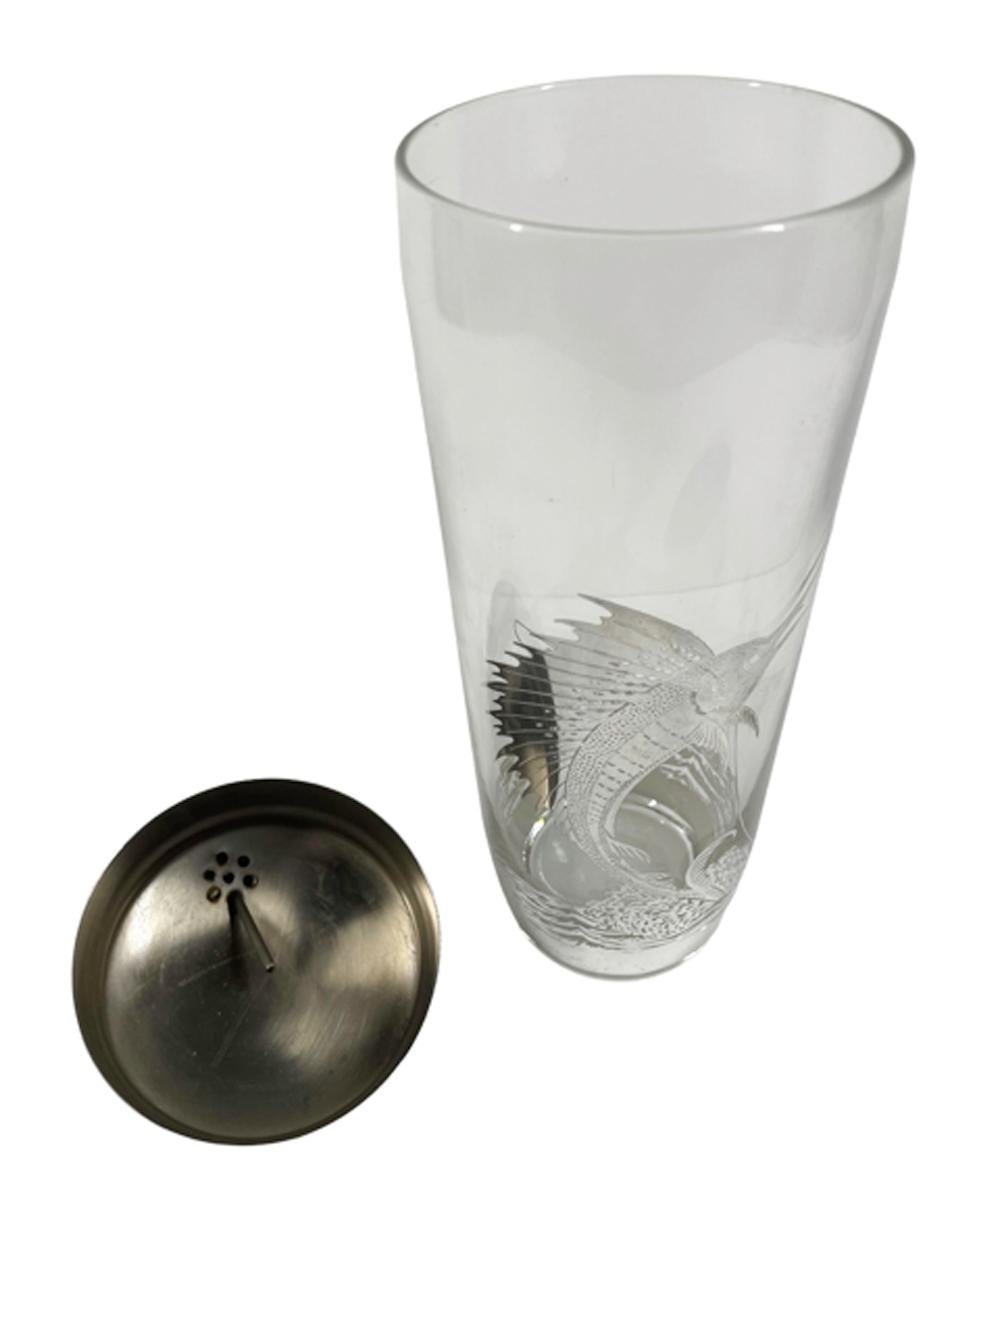 American Art Deco Silver Overlay Sailfish Cocktail Shaker & Six DOF by Rockwell Silver For Sale